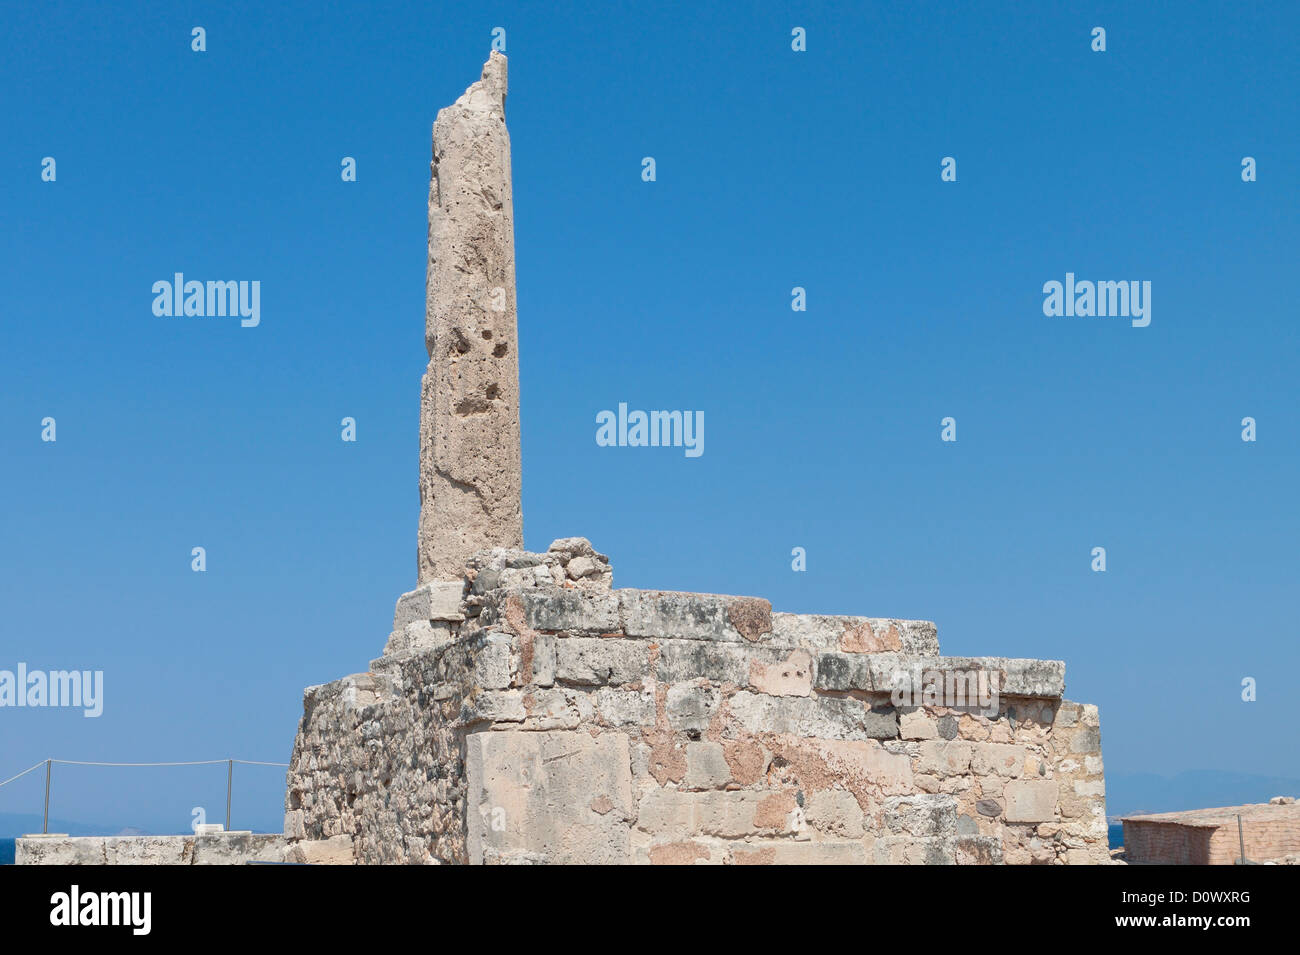 Ancient Aigina site with the famous Colona at Aegina island in Greece. Stock Photo